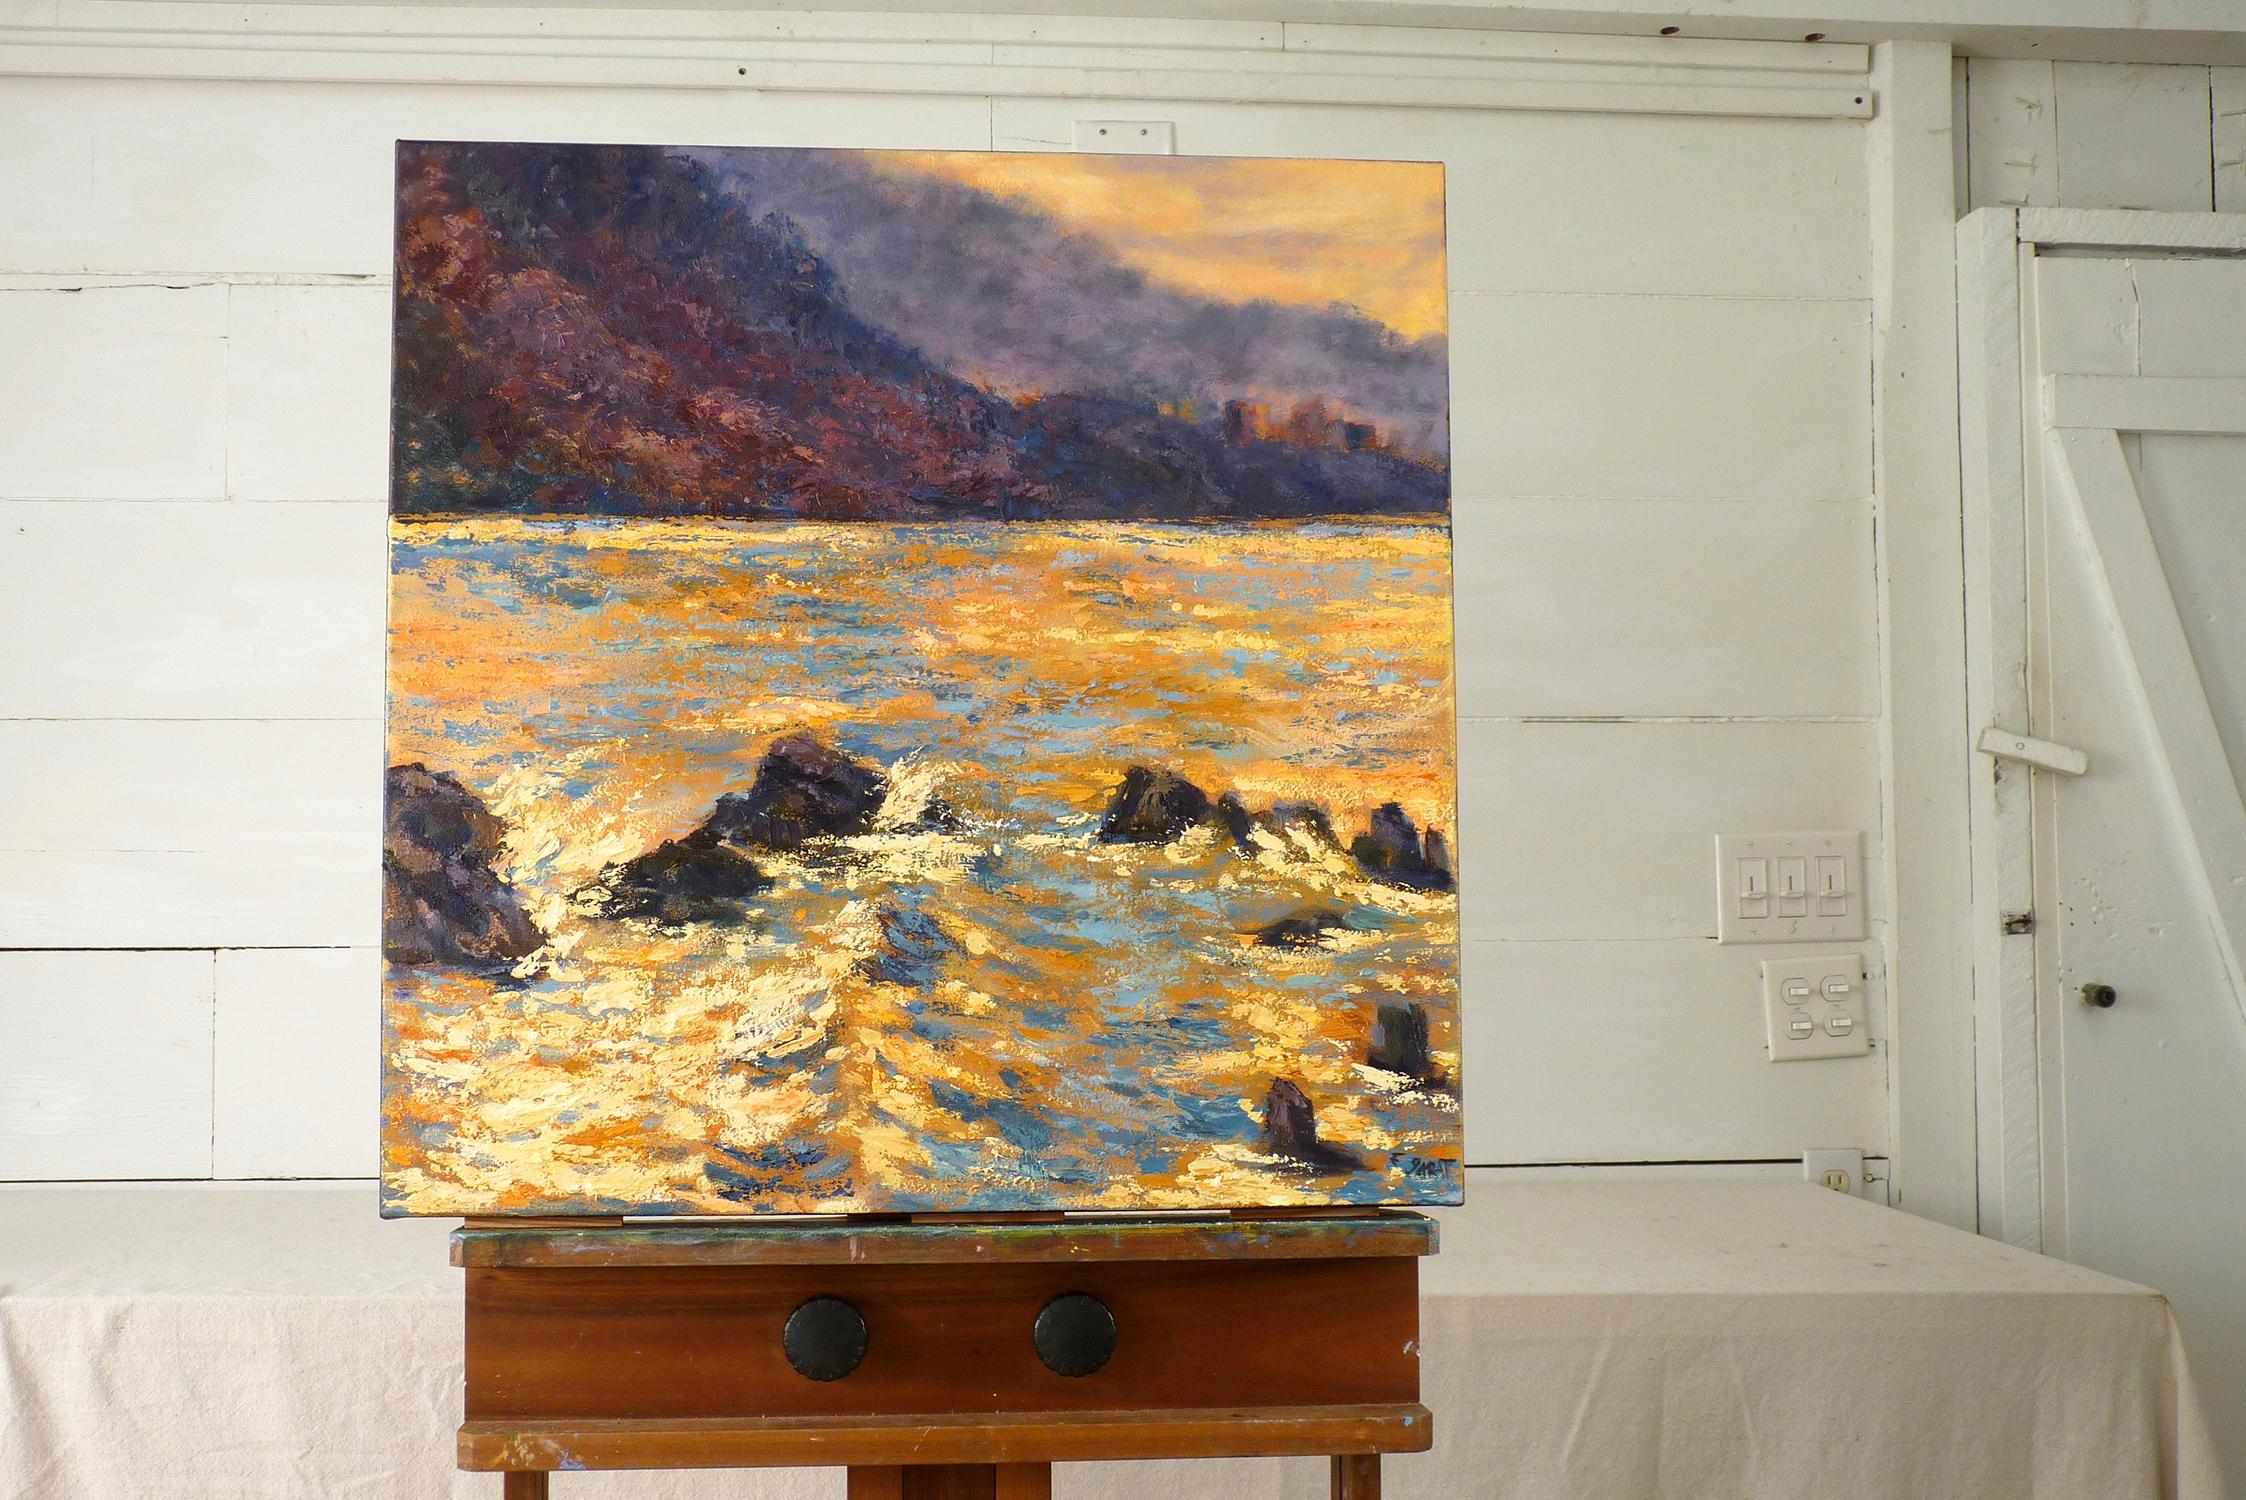 <p>Artist Comments<br /> In Sunrise at Malibu, I wanted to capture the rich plum silhouettes of the Santa Monica mountains just after dawn. On clear days after the sun rises, the caps of the ocean waves glow with warm colors.   The painting has